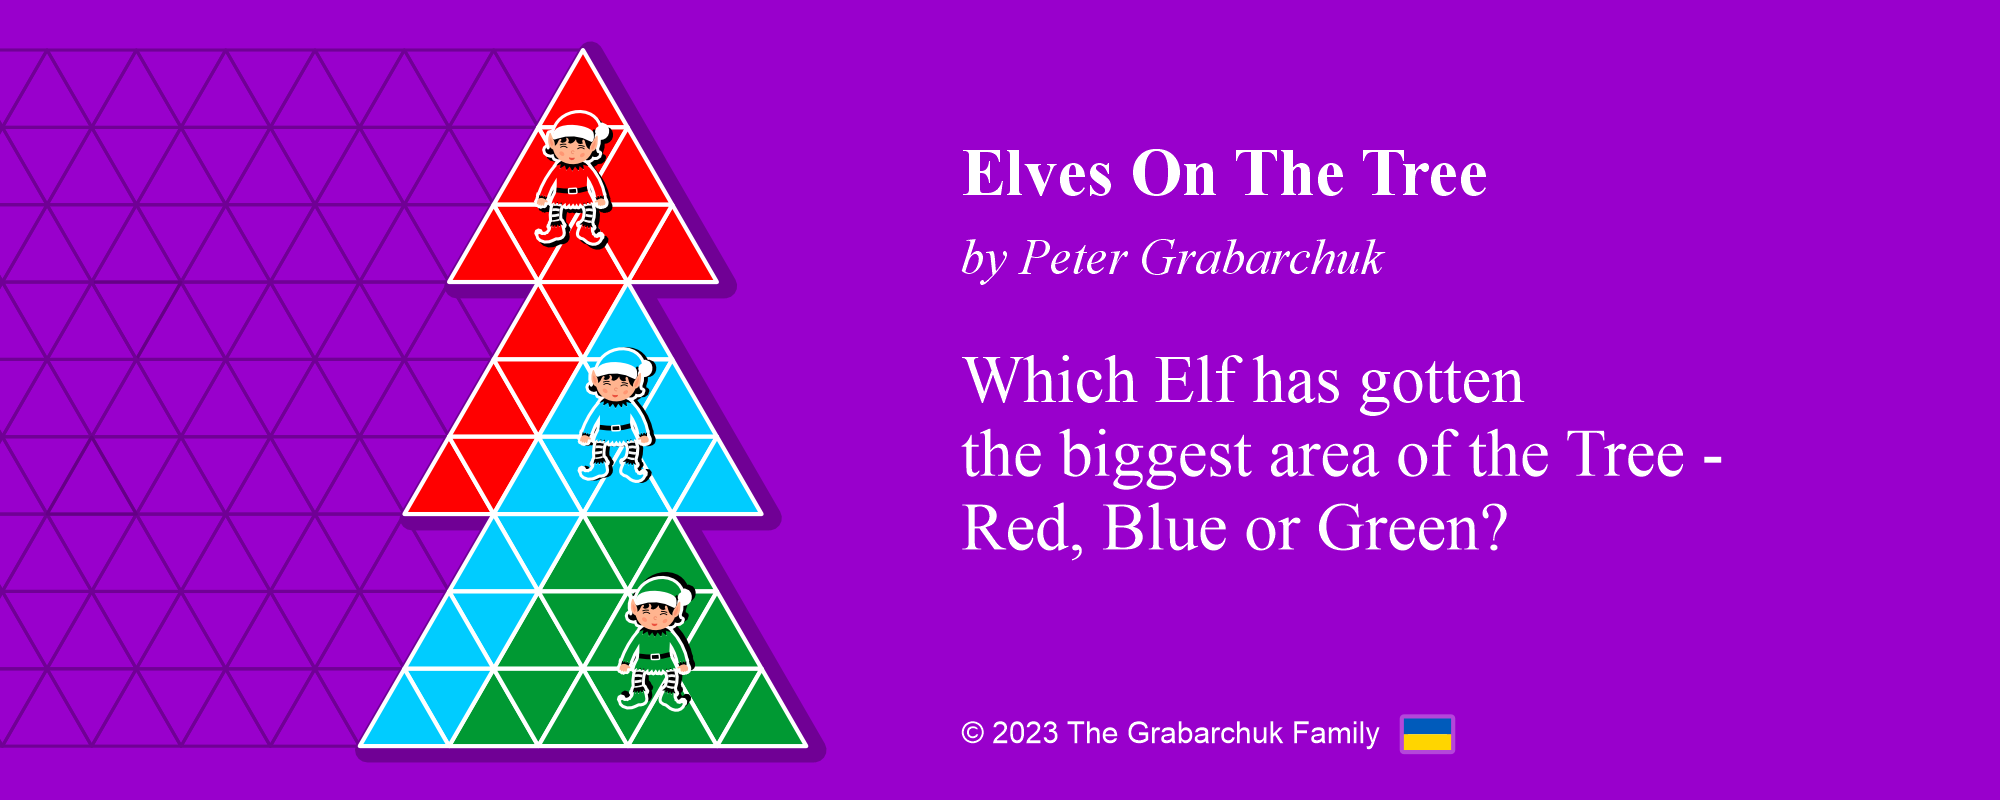 Elves On The Tree by Peter Grabarchuk